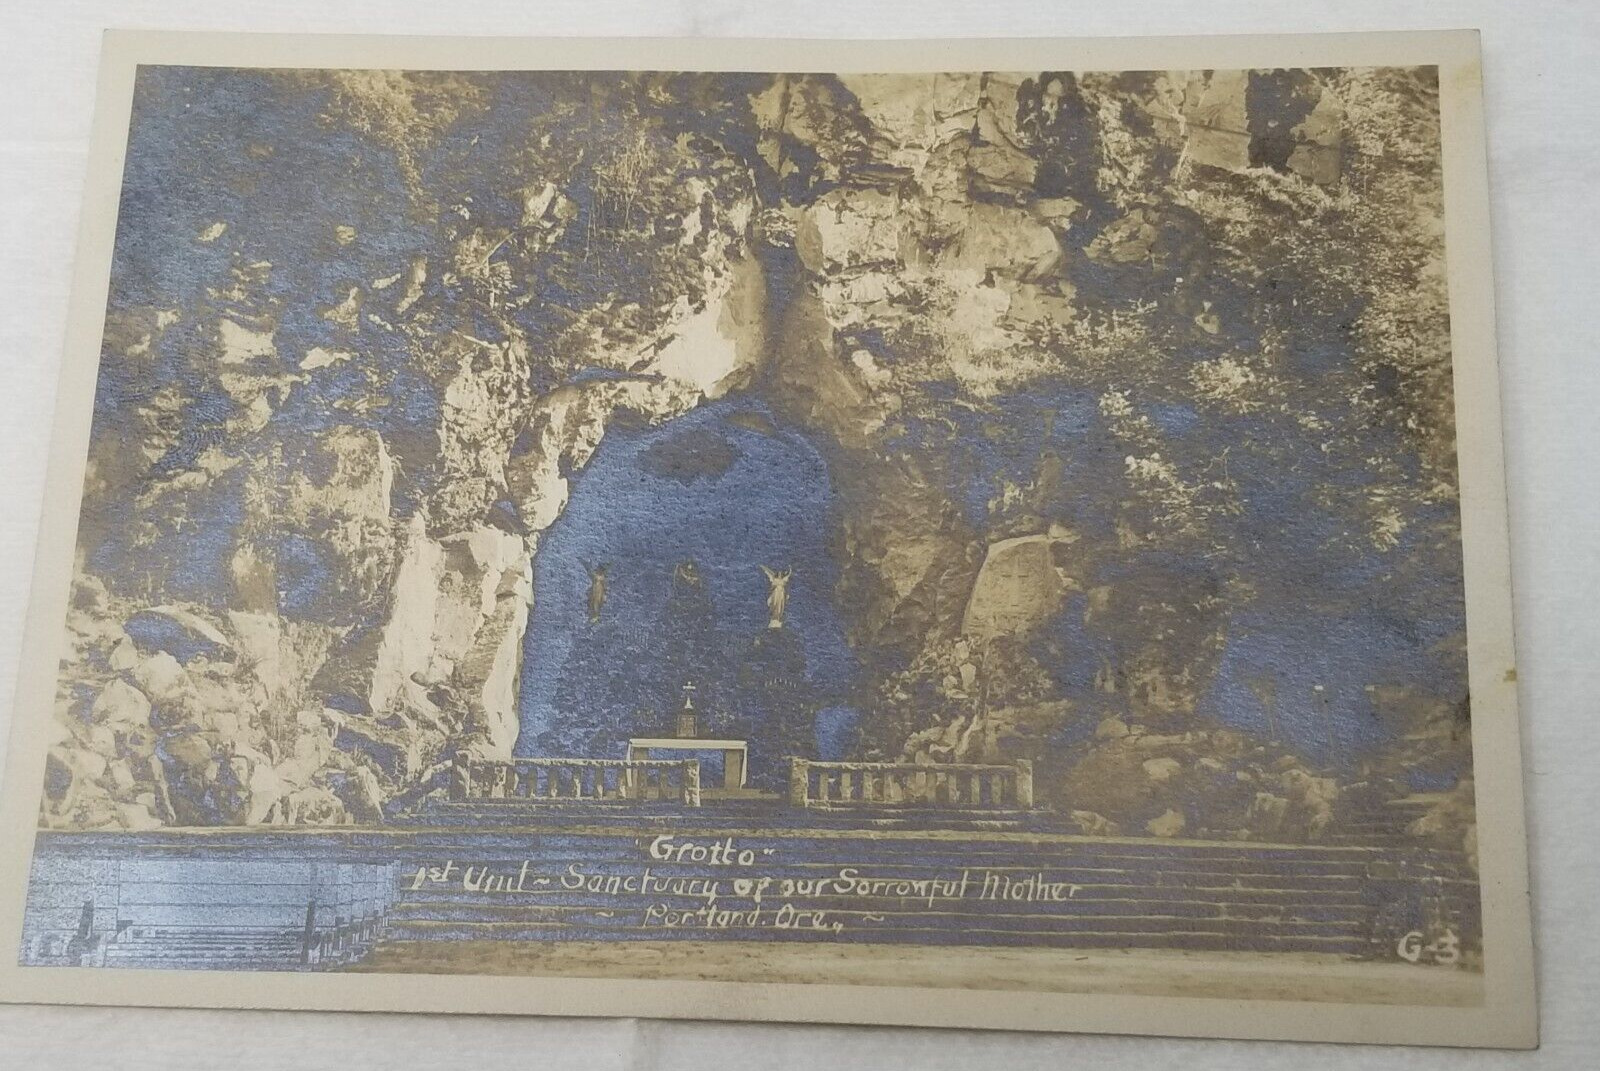 1928 Sanctuary of Our Sorrowful Mother The Grotto Photo Portland Oregon 1st Unit